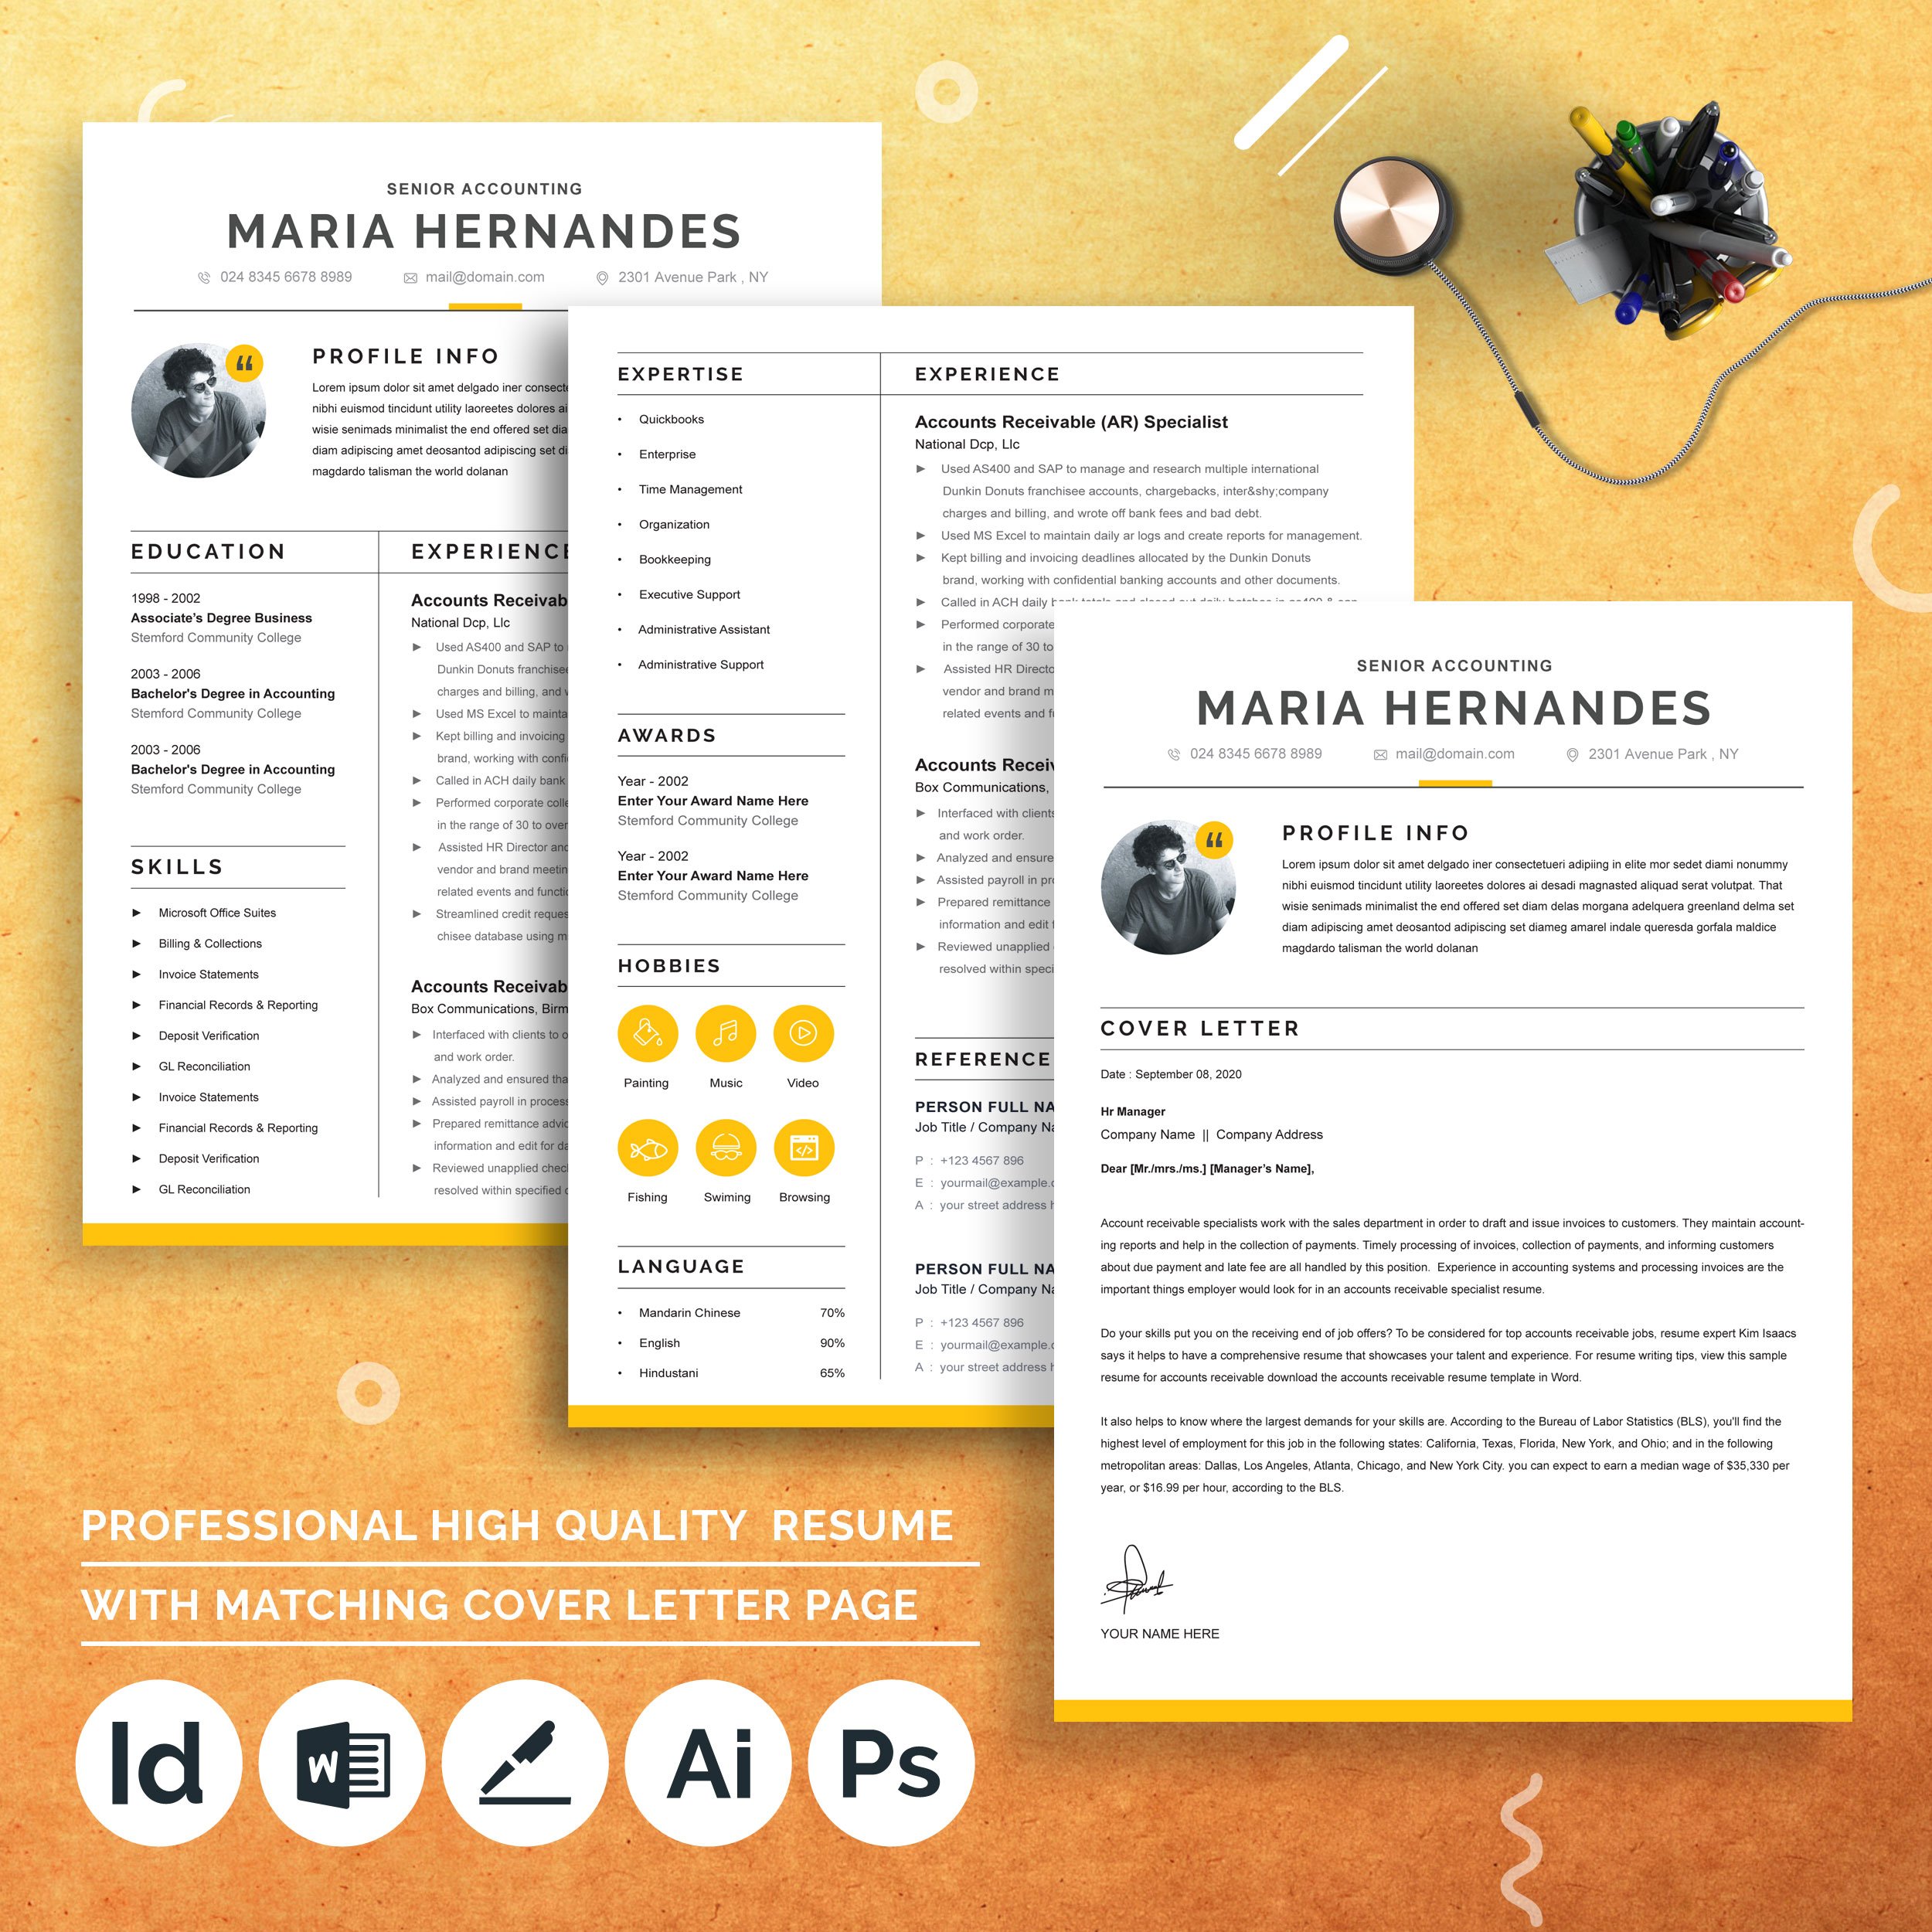 03 3 page resume cover letter page 743 1